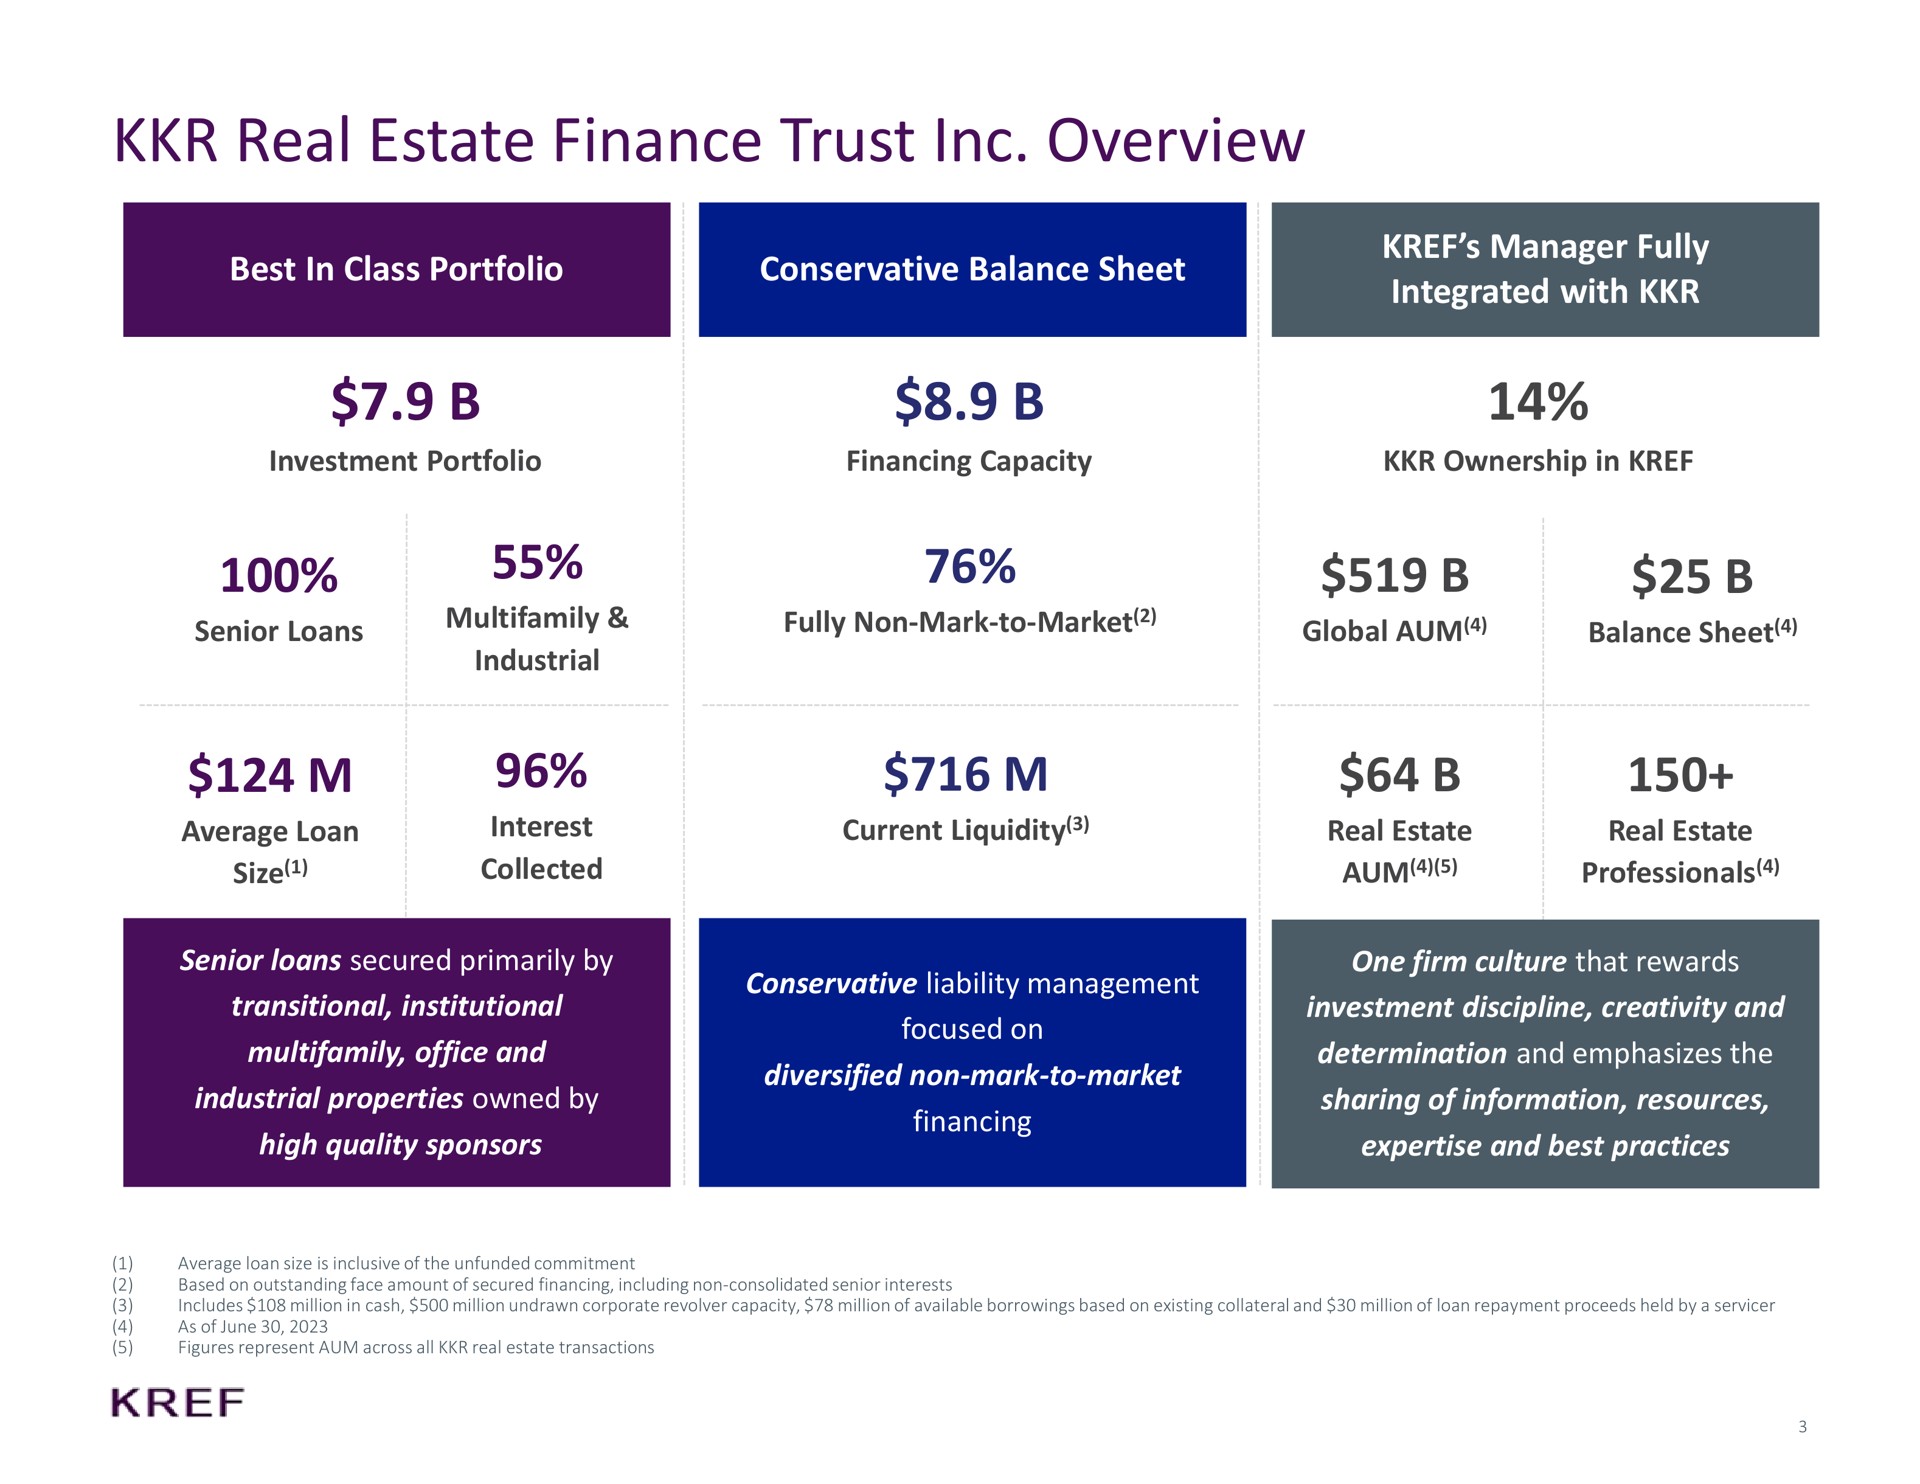 real estate finance trust overview best in class portfolio conservative balance sheet manager fully integrated with industrial size collected non mark to market global aum aum professionals | KKR Real Estate Finance Trust